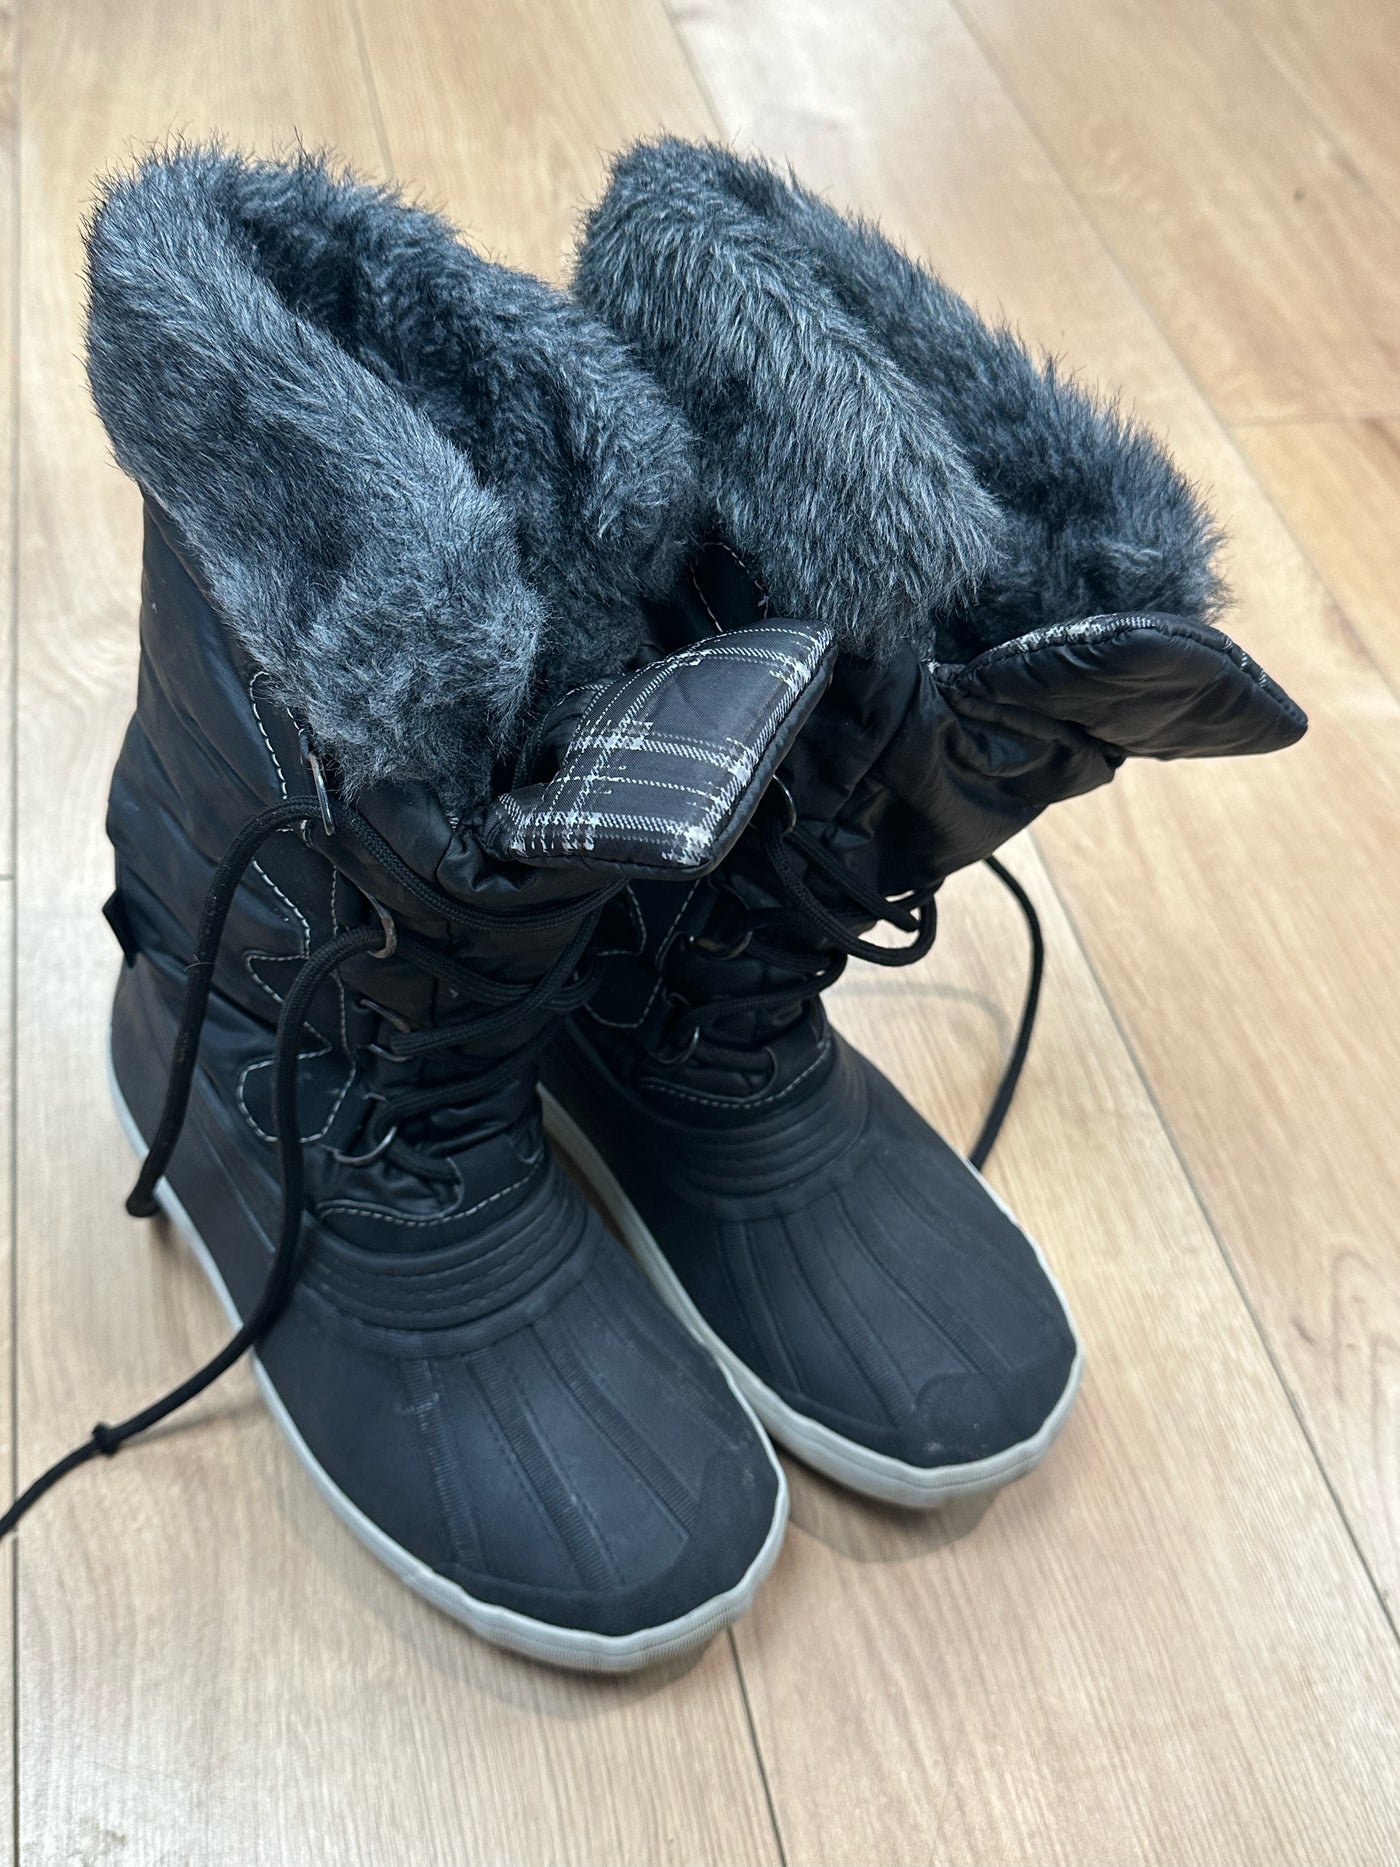 Pre-loved Adult Amelia Boots Size 38/39 (100) Grade B